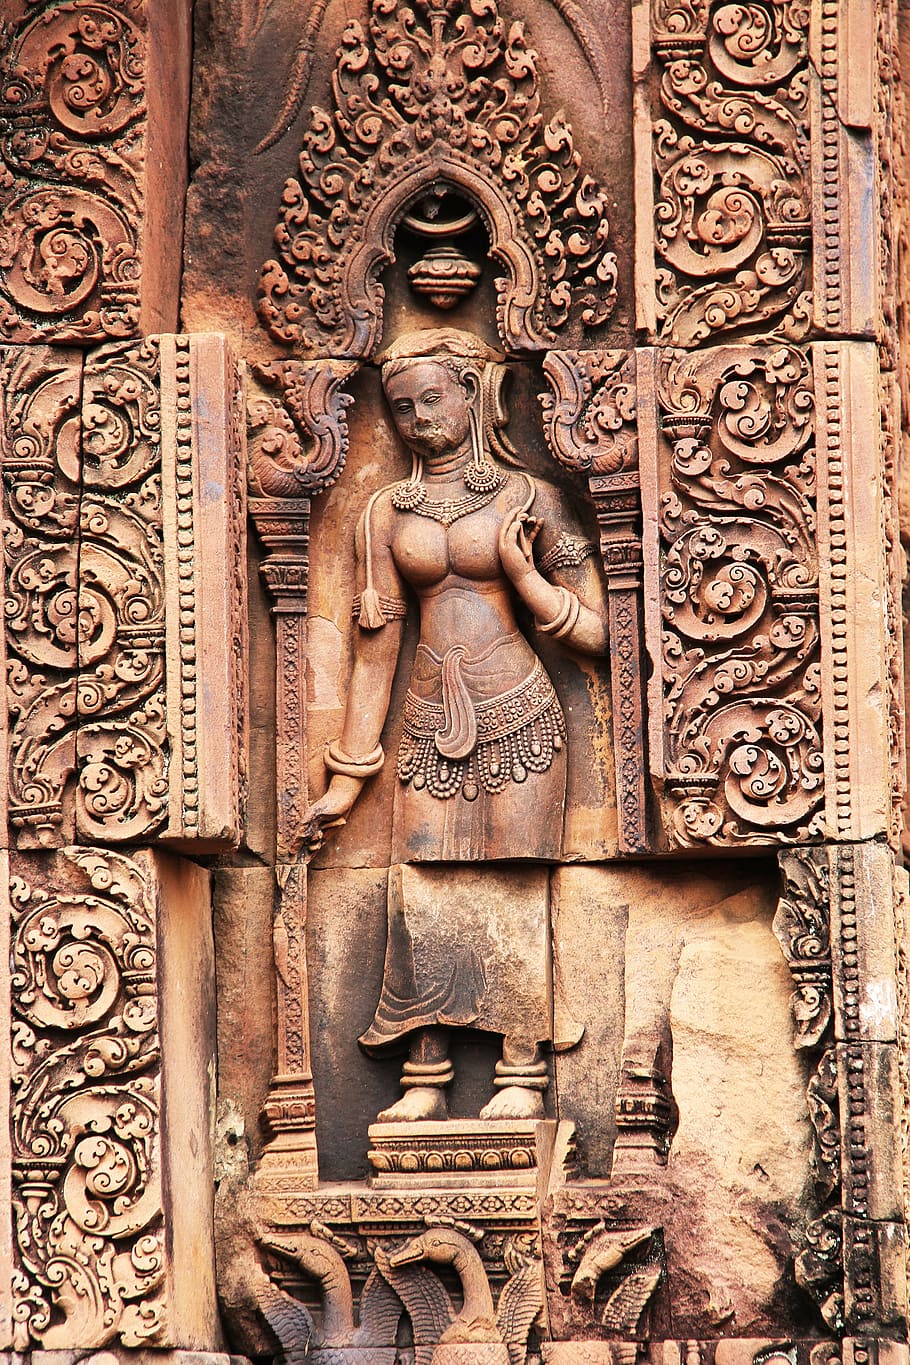 banteay srei, temple, travel, antique, old, beautiful, angkor wat, siem reap, cambodia, asia